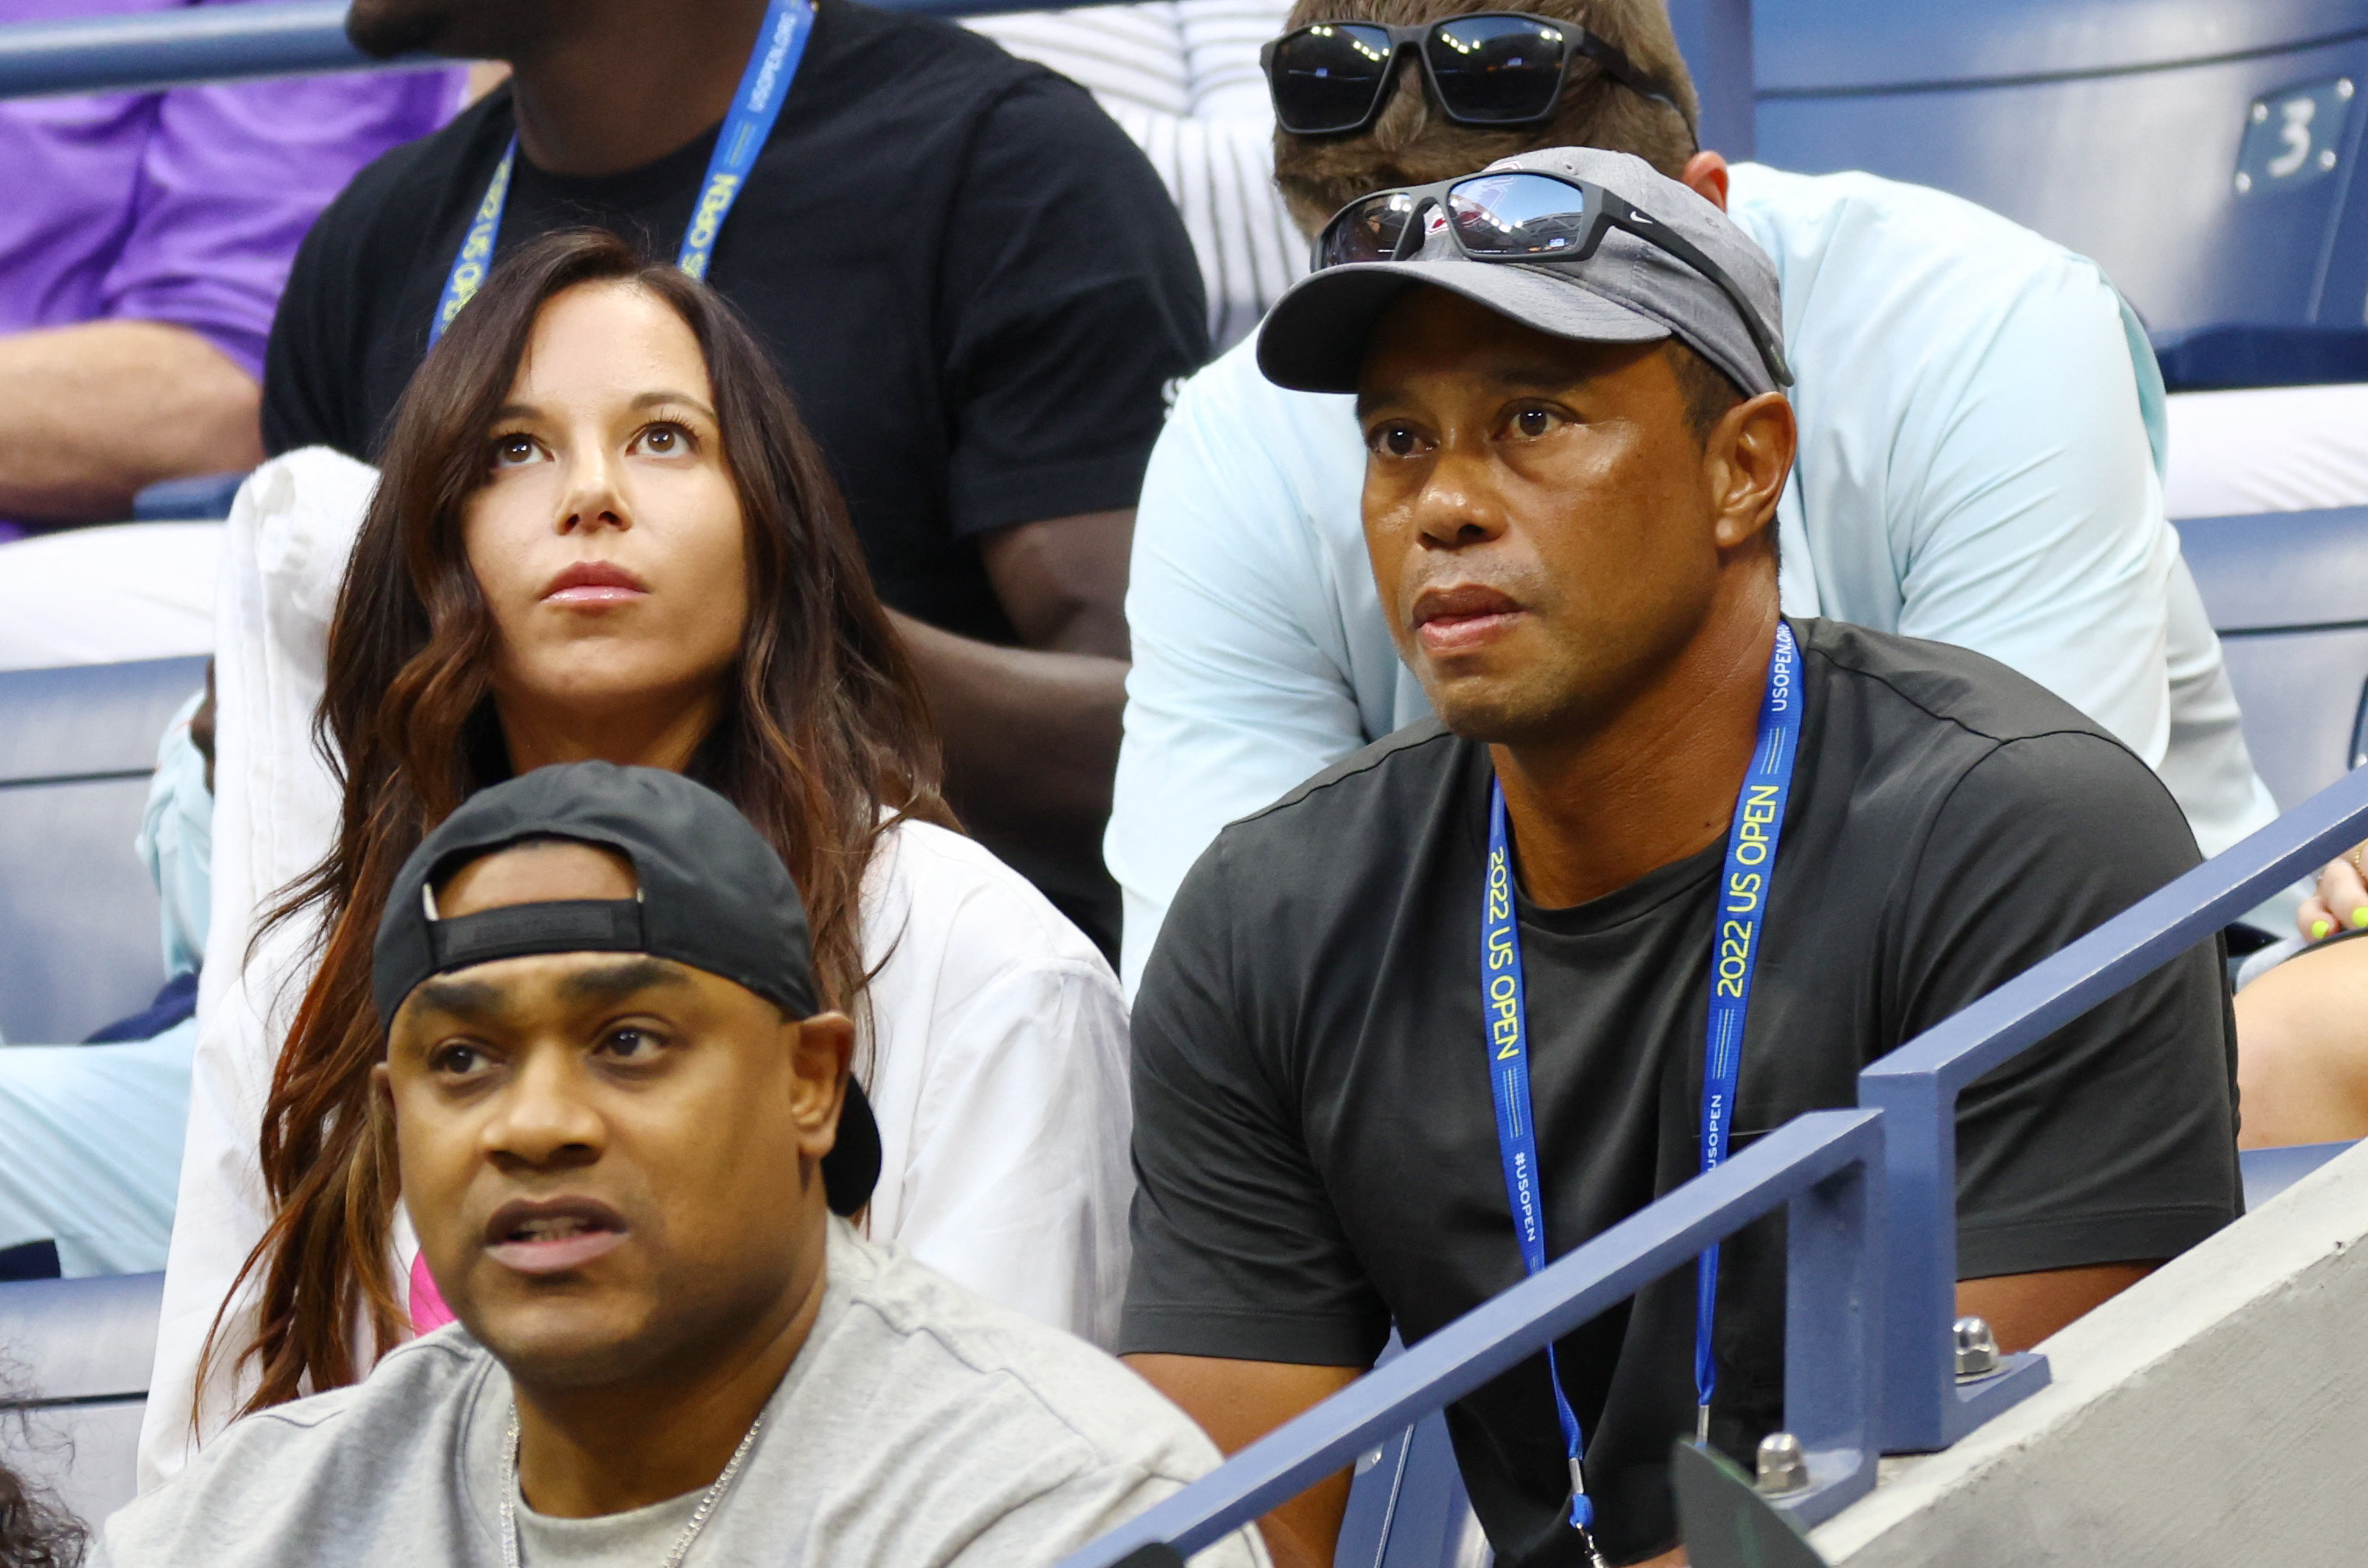 Tiger Woods and Erica Herman watched from Serena's player box